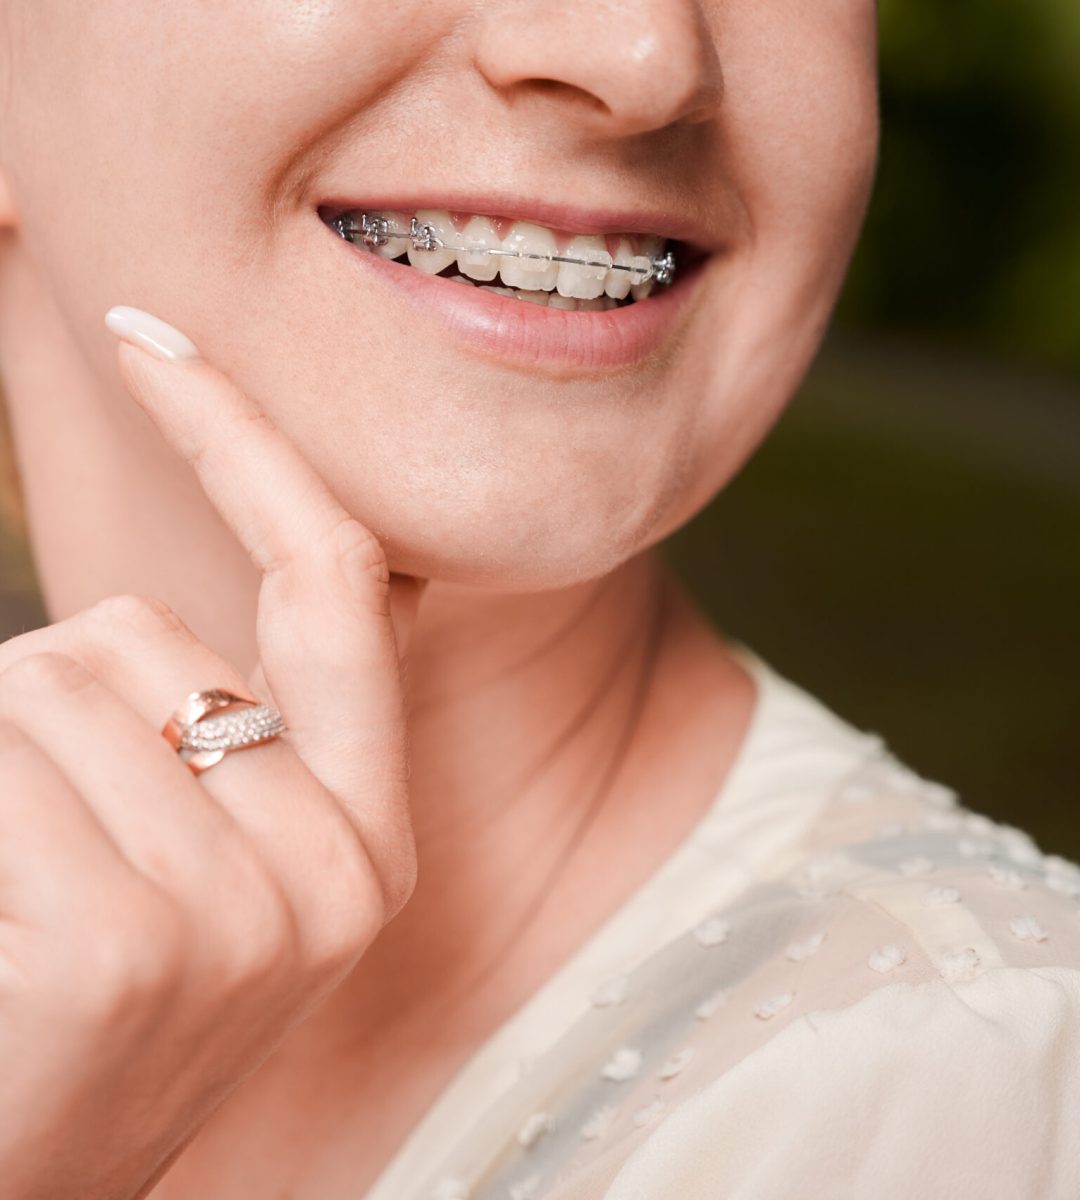 Close up of woman with orthodontic brackets on teeth touching chin and smiling. Patient demonstrating results of dental braces treatment. Concept of dentistry, stomatology and orthodontic treatment.